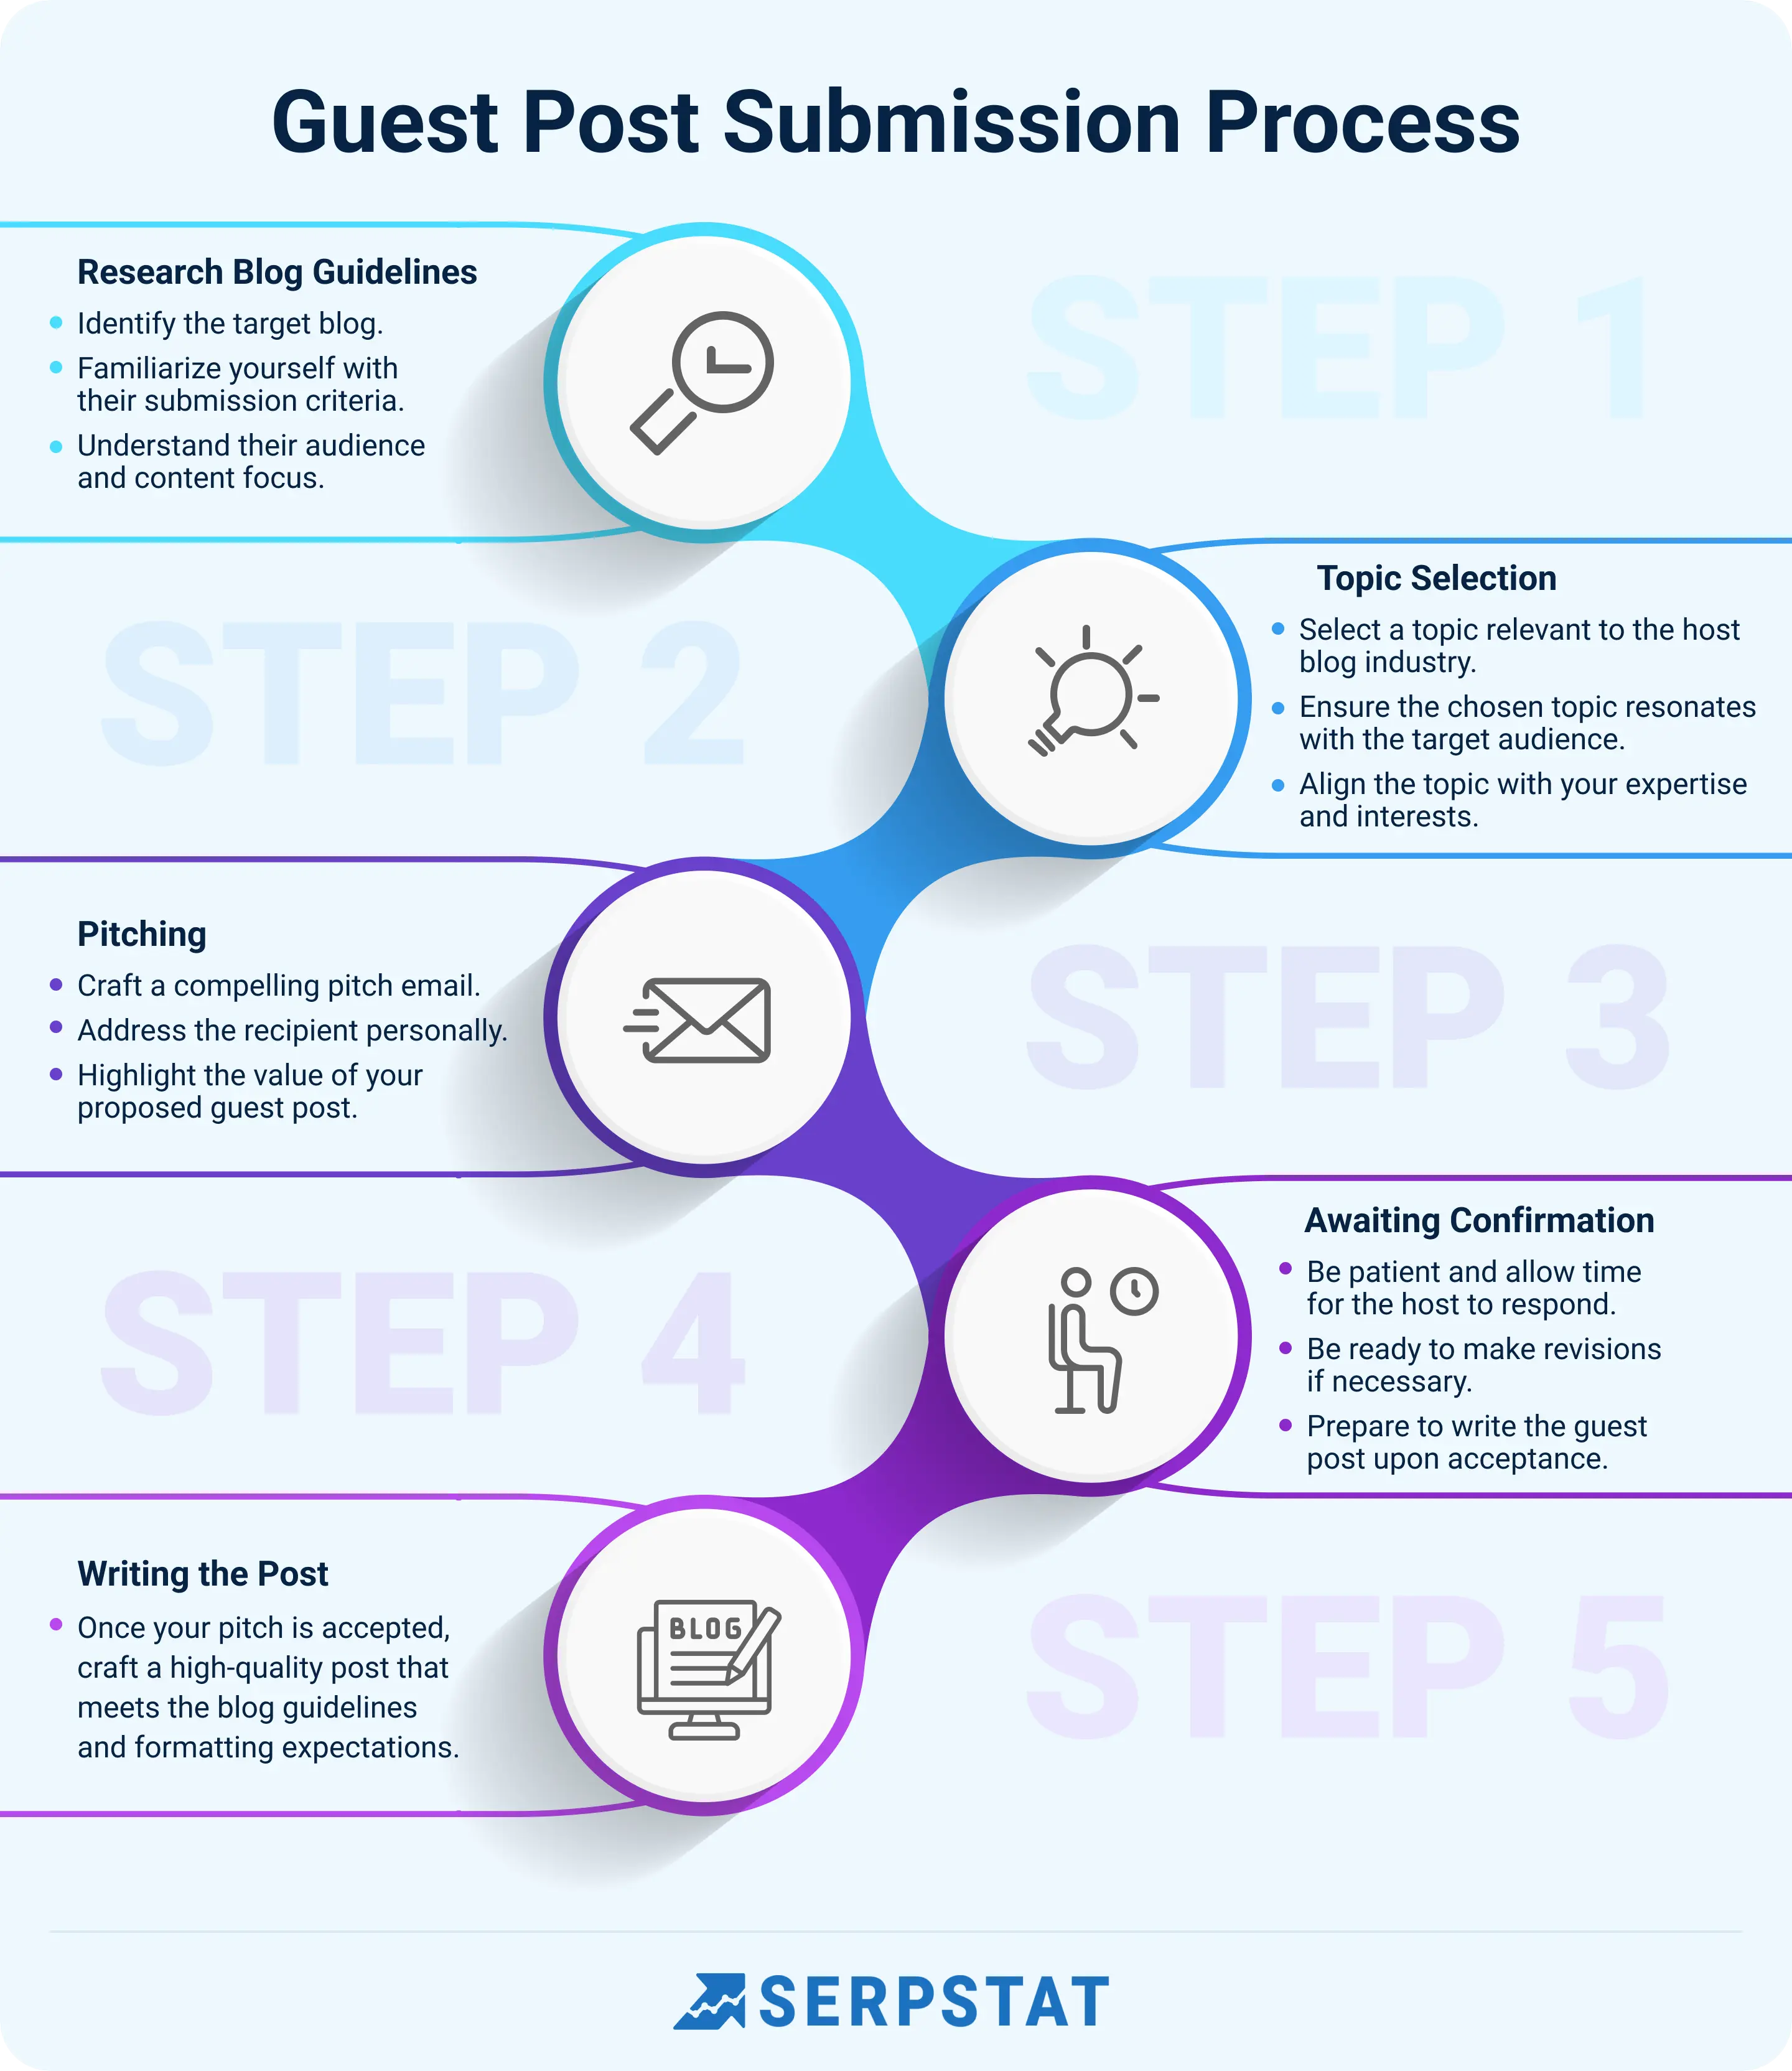 Steps of the process to submit a guest blog post.